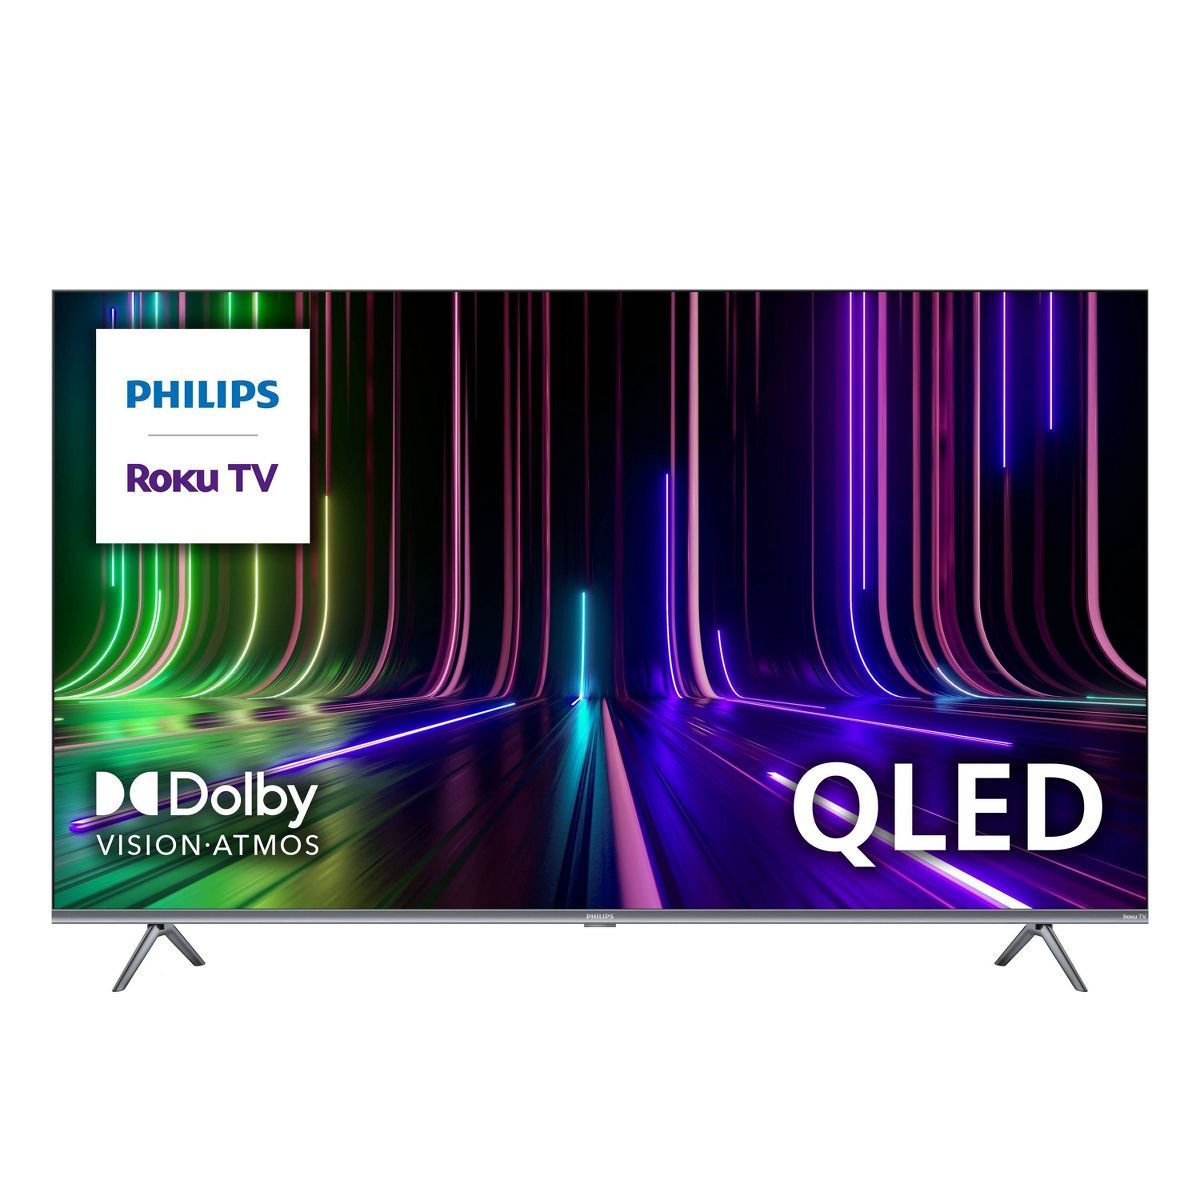 Philips 50" 4K QLED Roku Smart TV - 50PUL7973/F7 - Special Purchase | Target